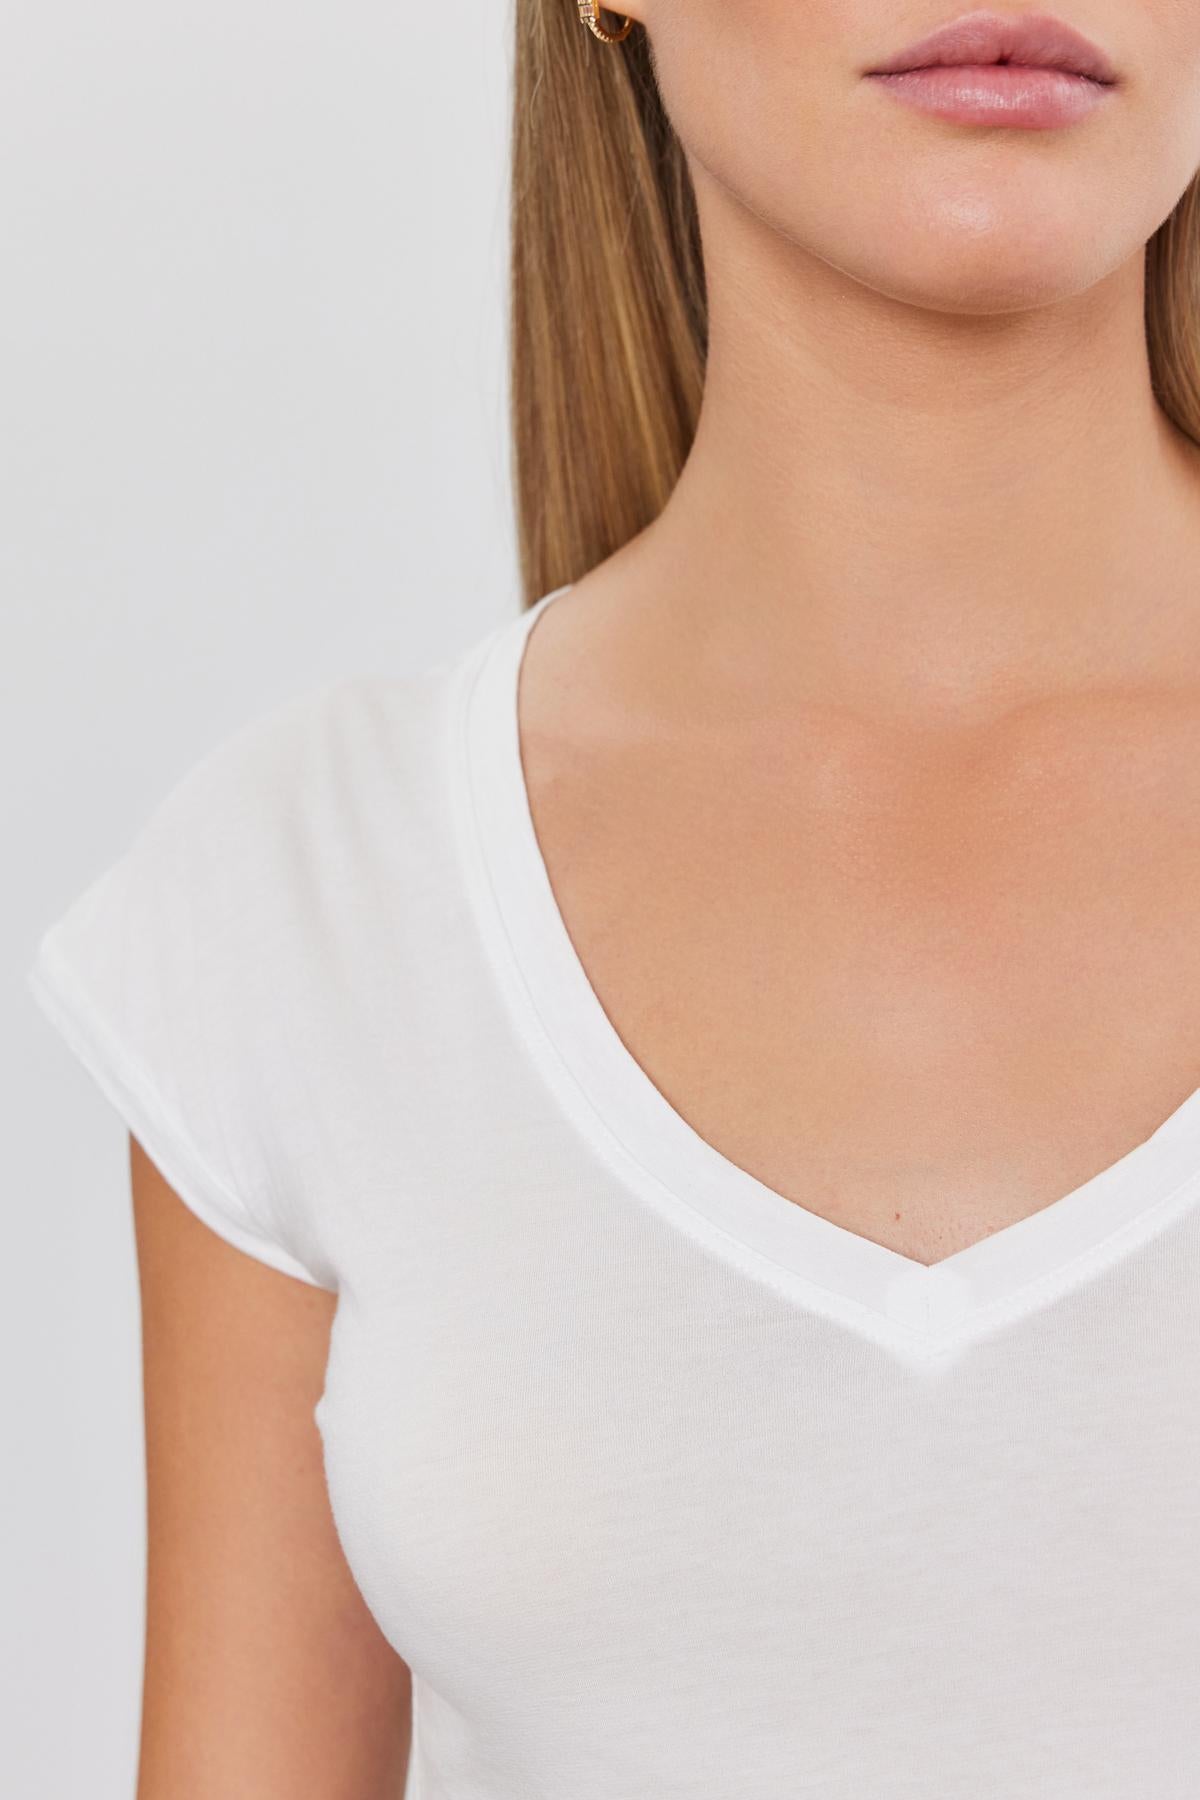 Close-up of a woman wearing a white TOBY TEE v-neck t-shirt by Velvet by Graham & Spencer, focusing on the neckline and collar area.-36752997417153